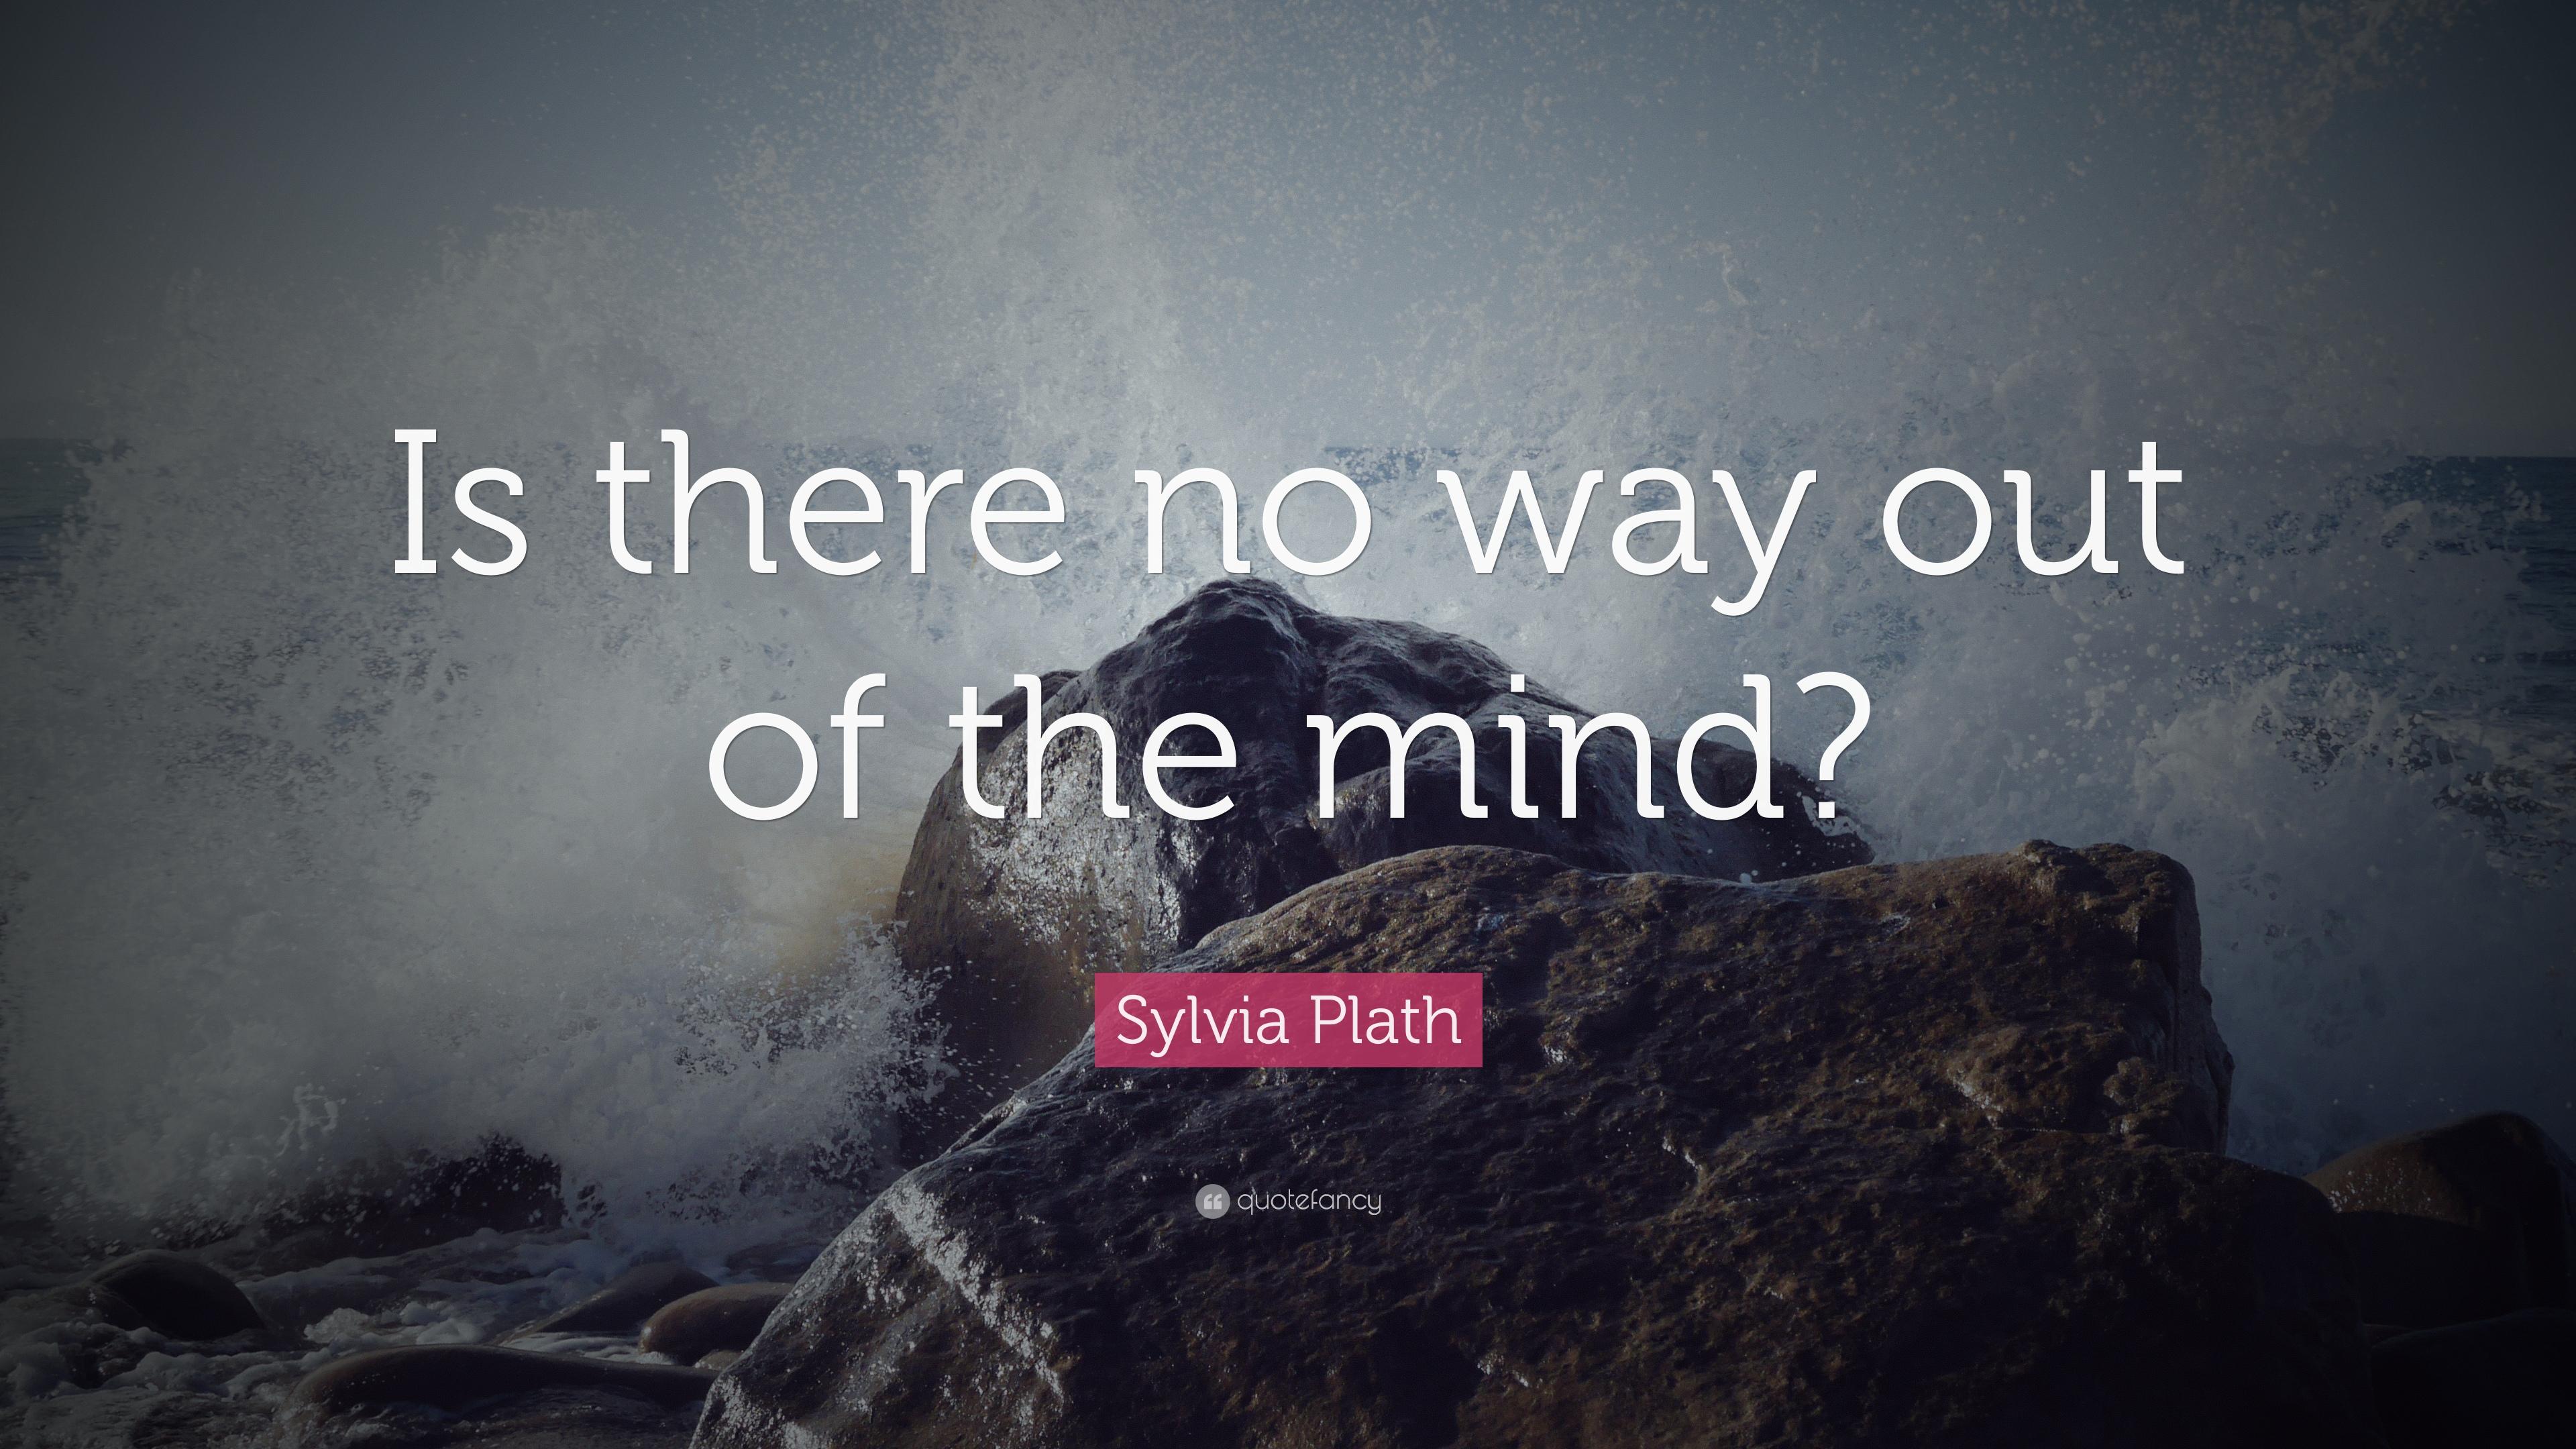 Sylvia Plath Quote: "Is there no way out of the mind? 